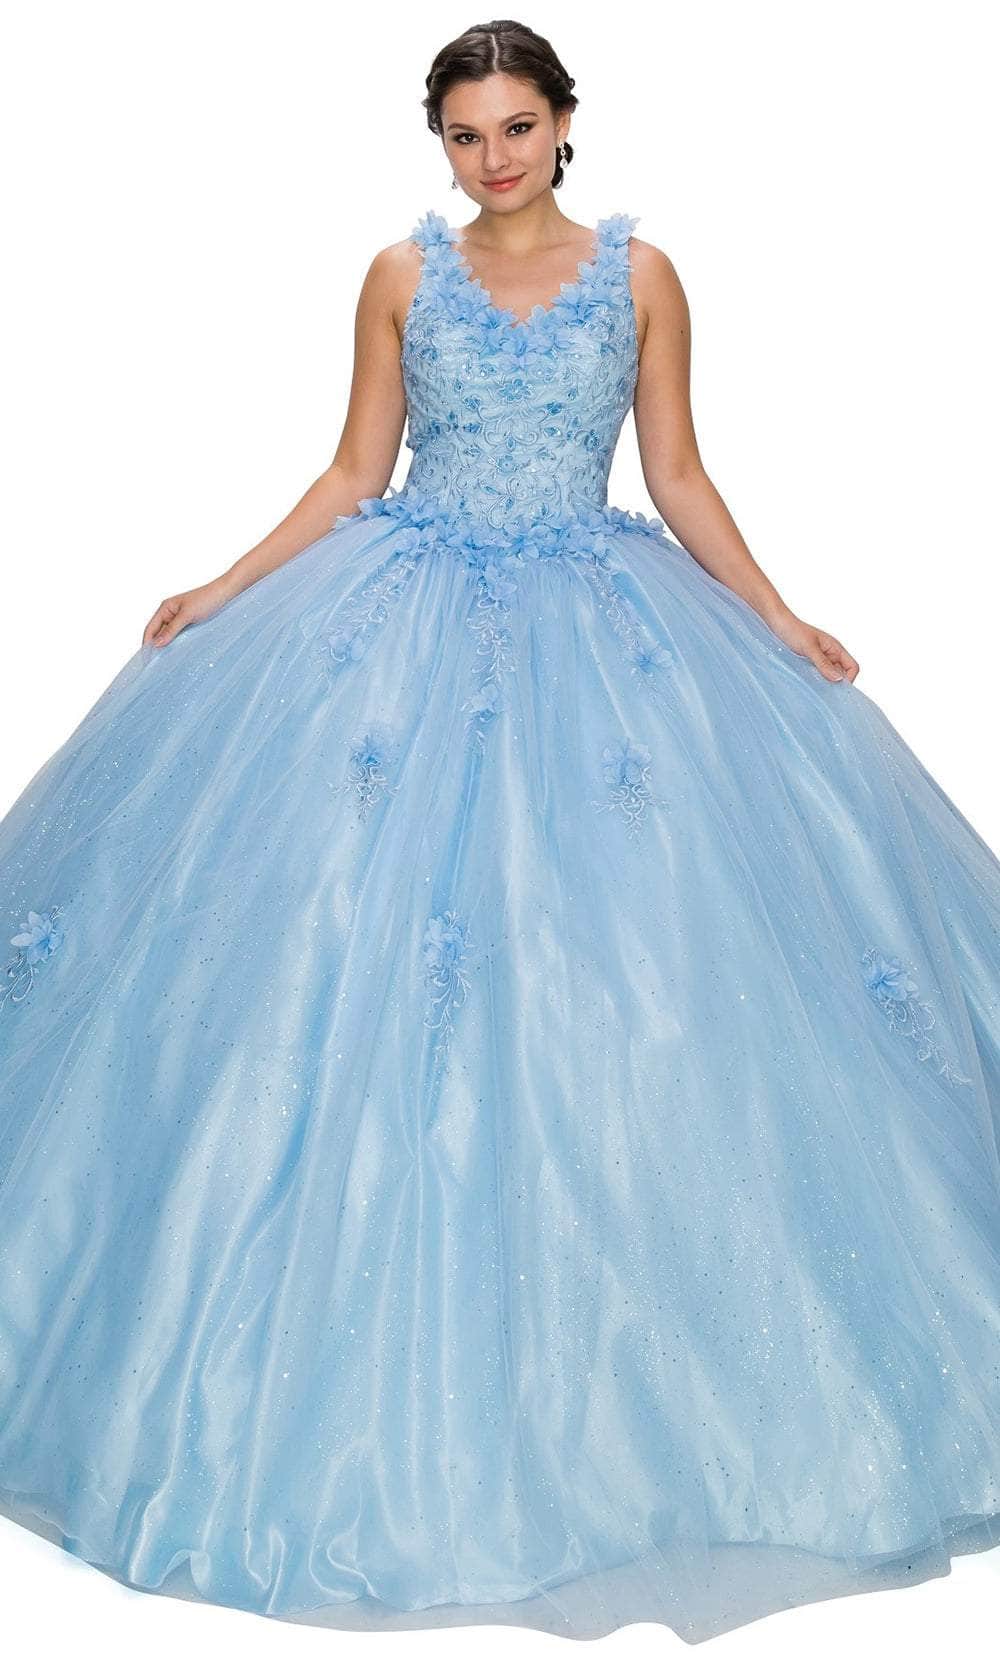 Cinderella Couture 8025J - Embroidered Sleeveless Ballgown Special Occasion Dress XS / Blue